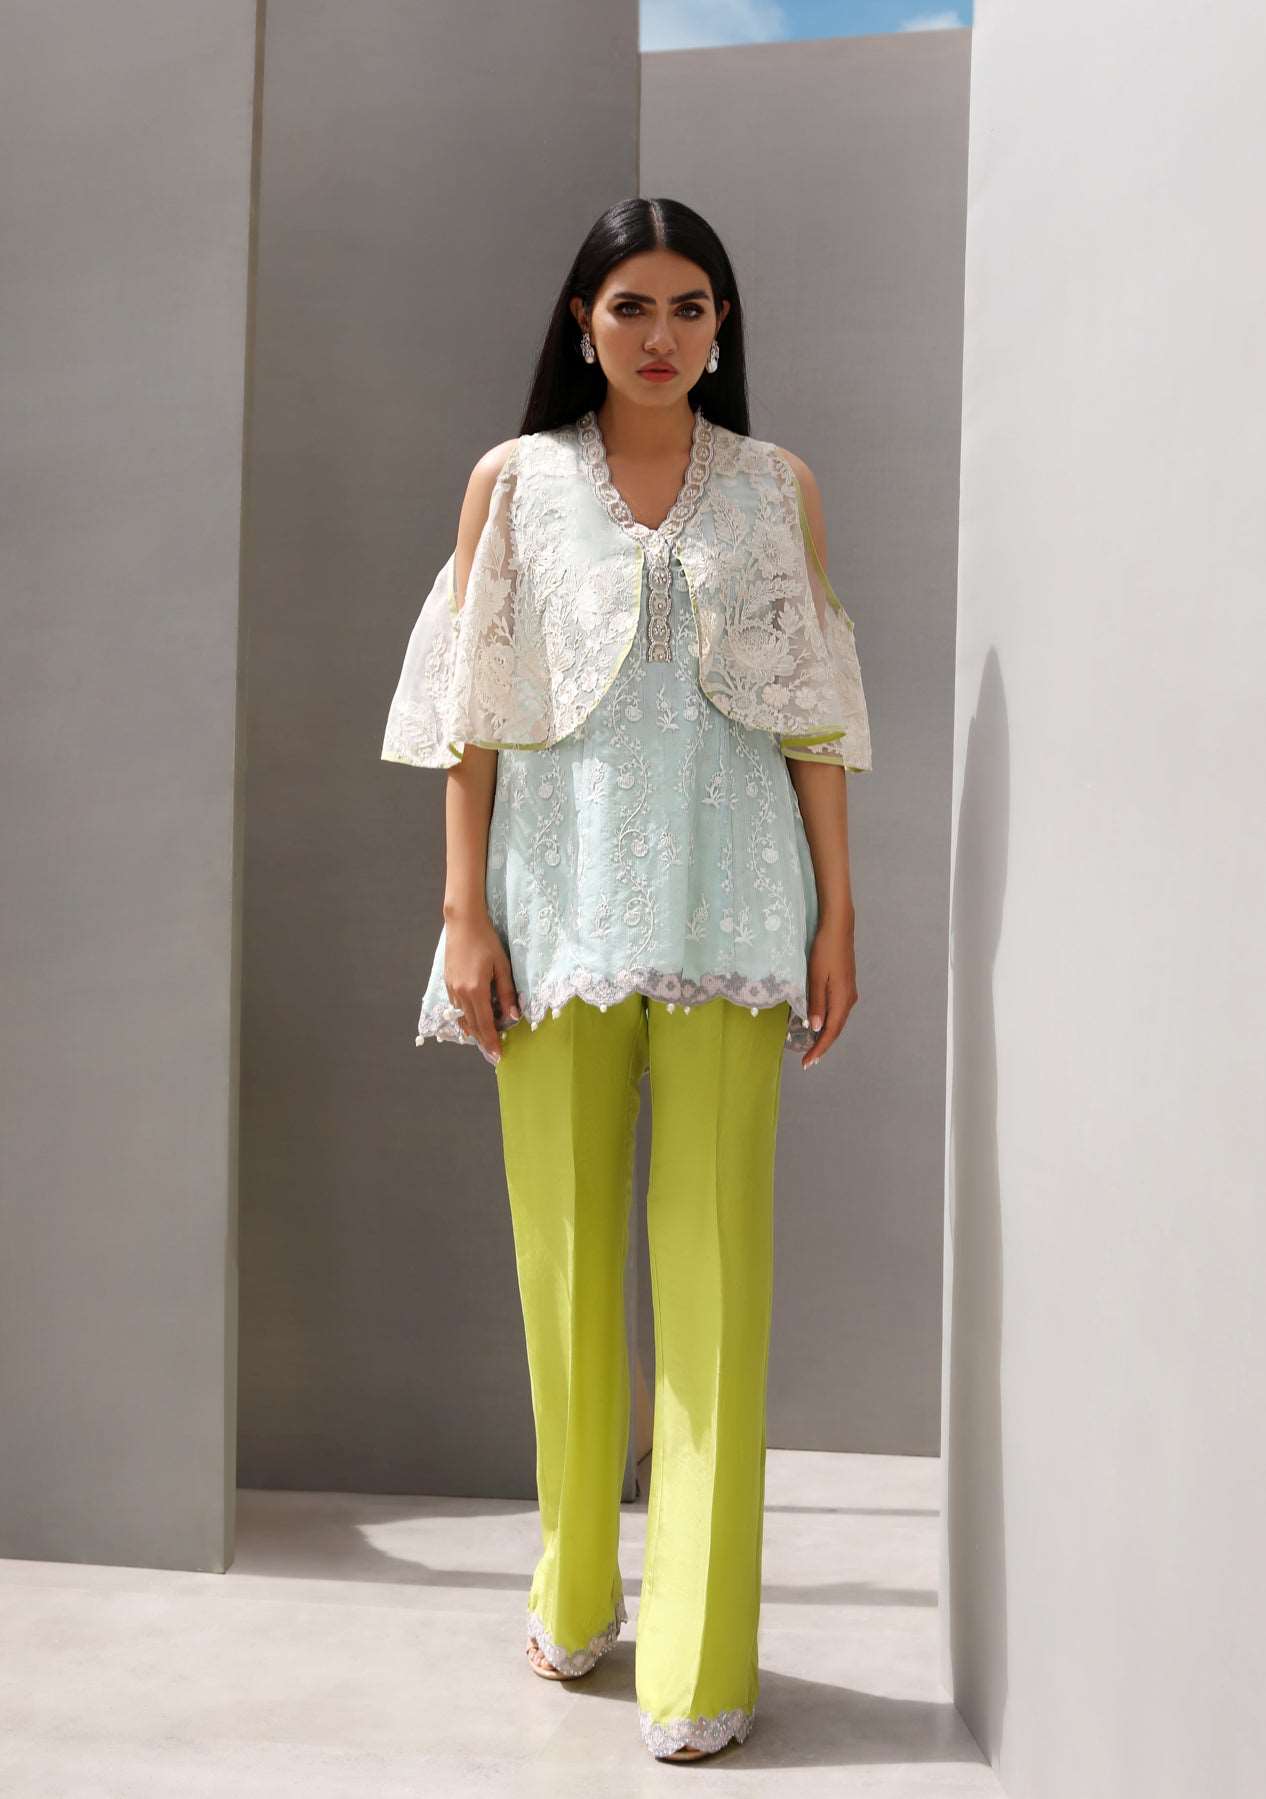 Cape with peplum top and pearl detailed pants